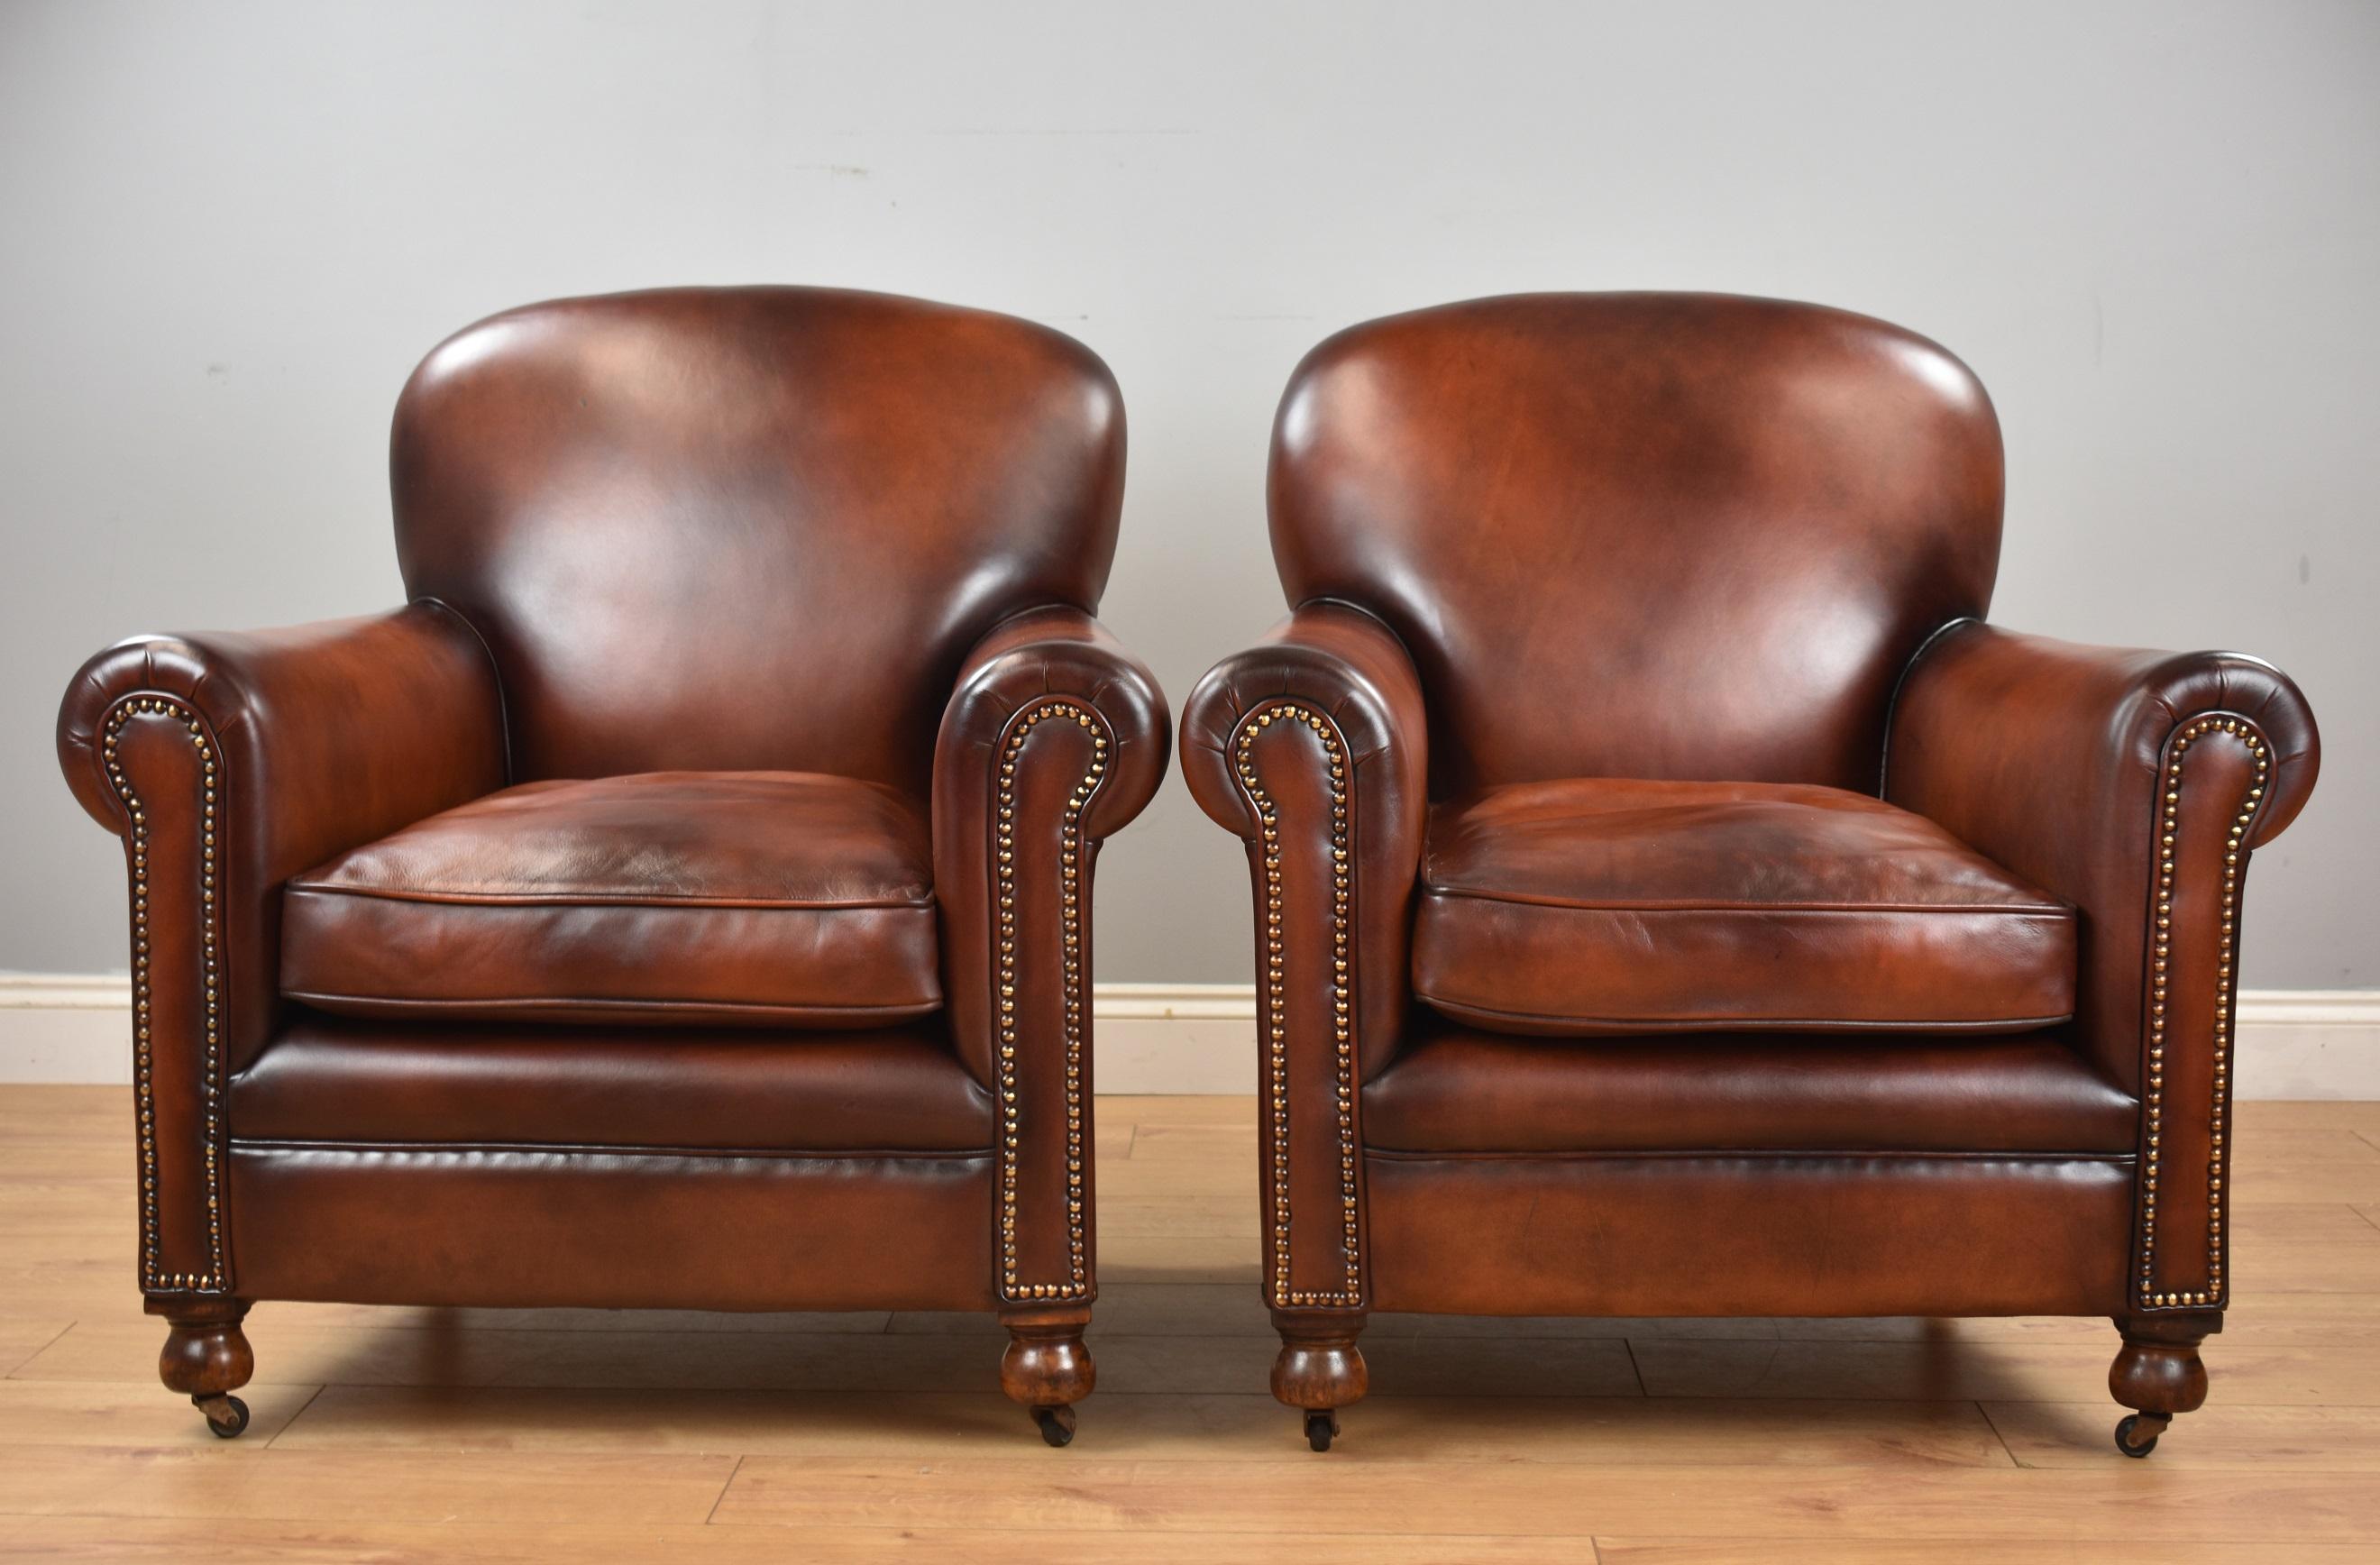 Superb pair of hand dyed honey brown leather armchairs with close studding to the arms and back standing on elegant feet with castors.